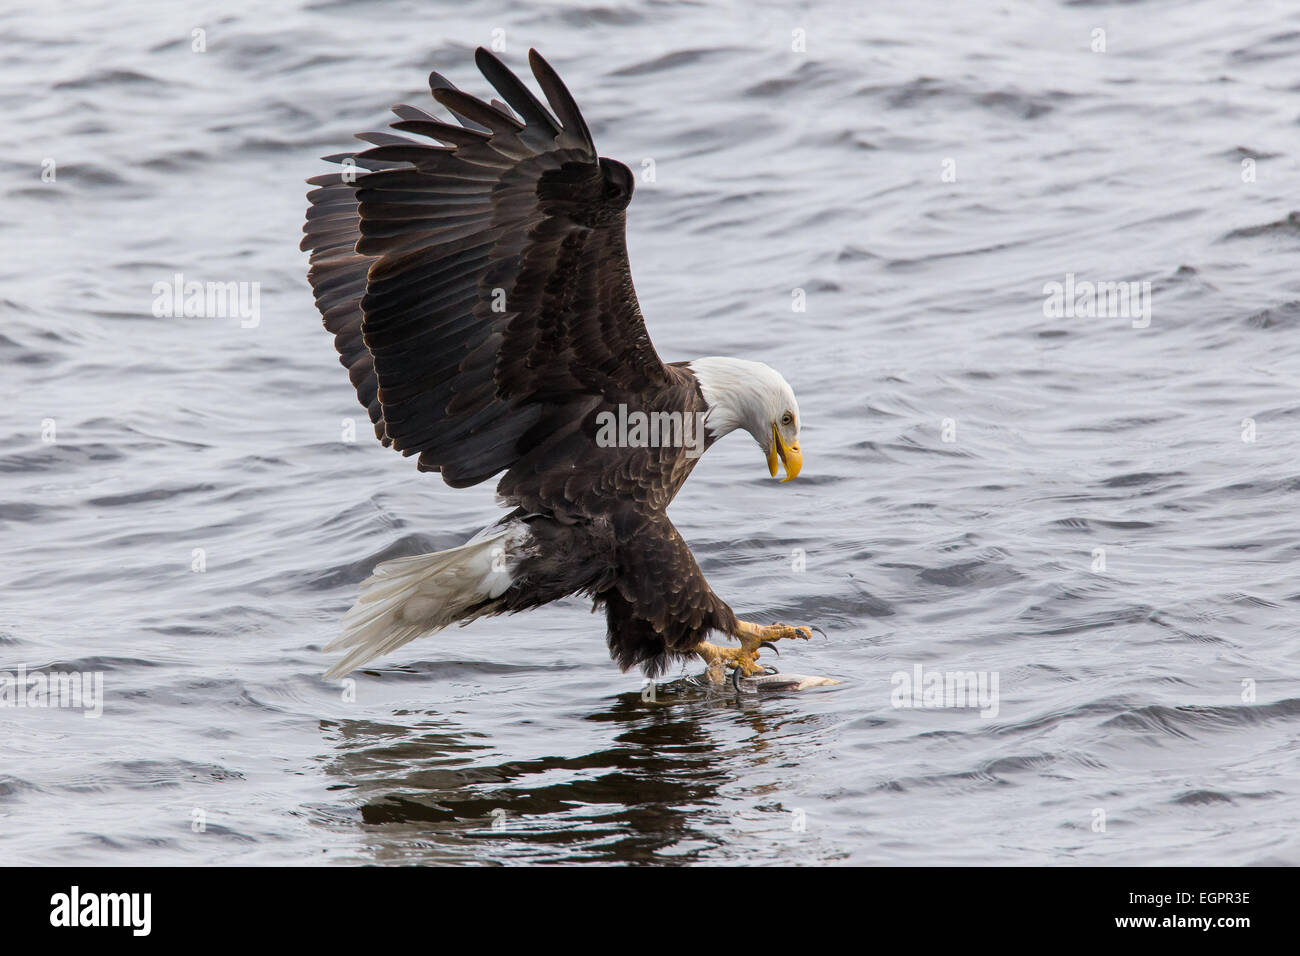 A mature Bald Eagle catching a fish from the Mississippi River. Stock Photo